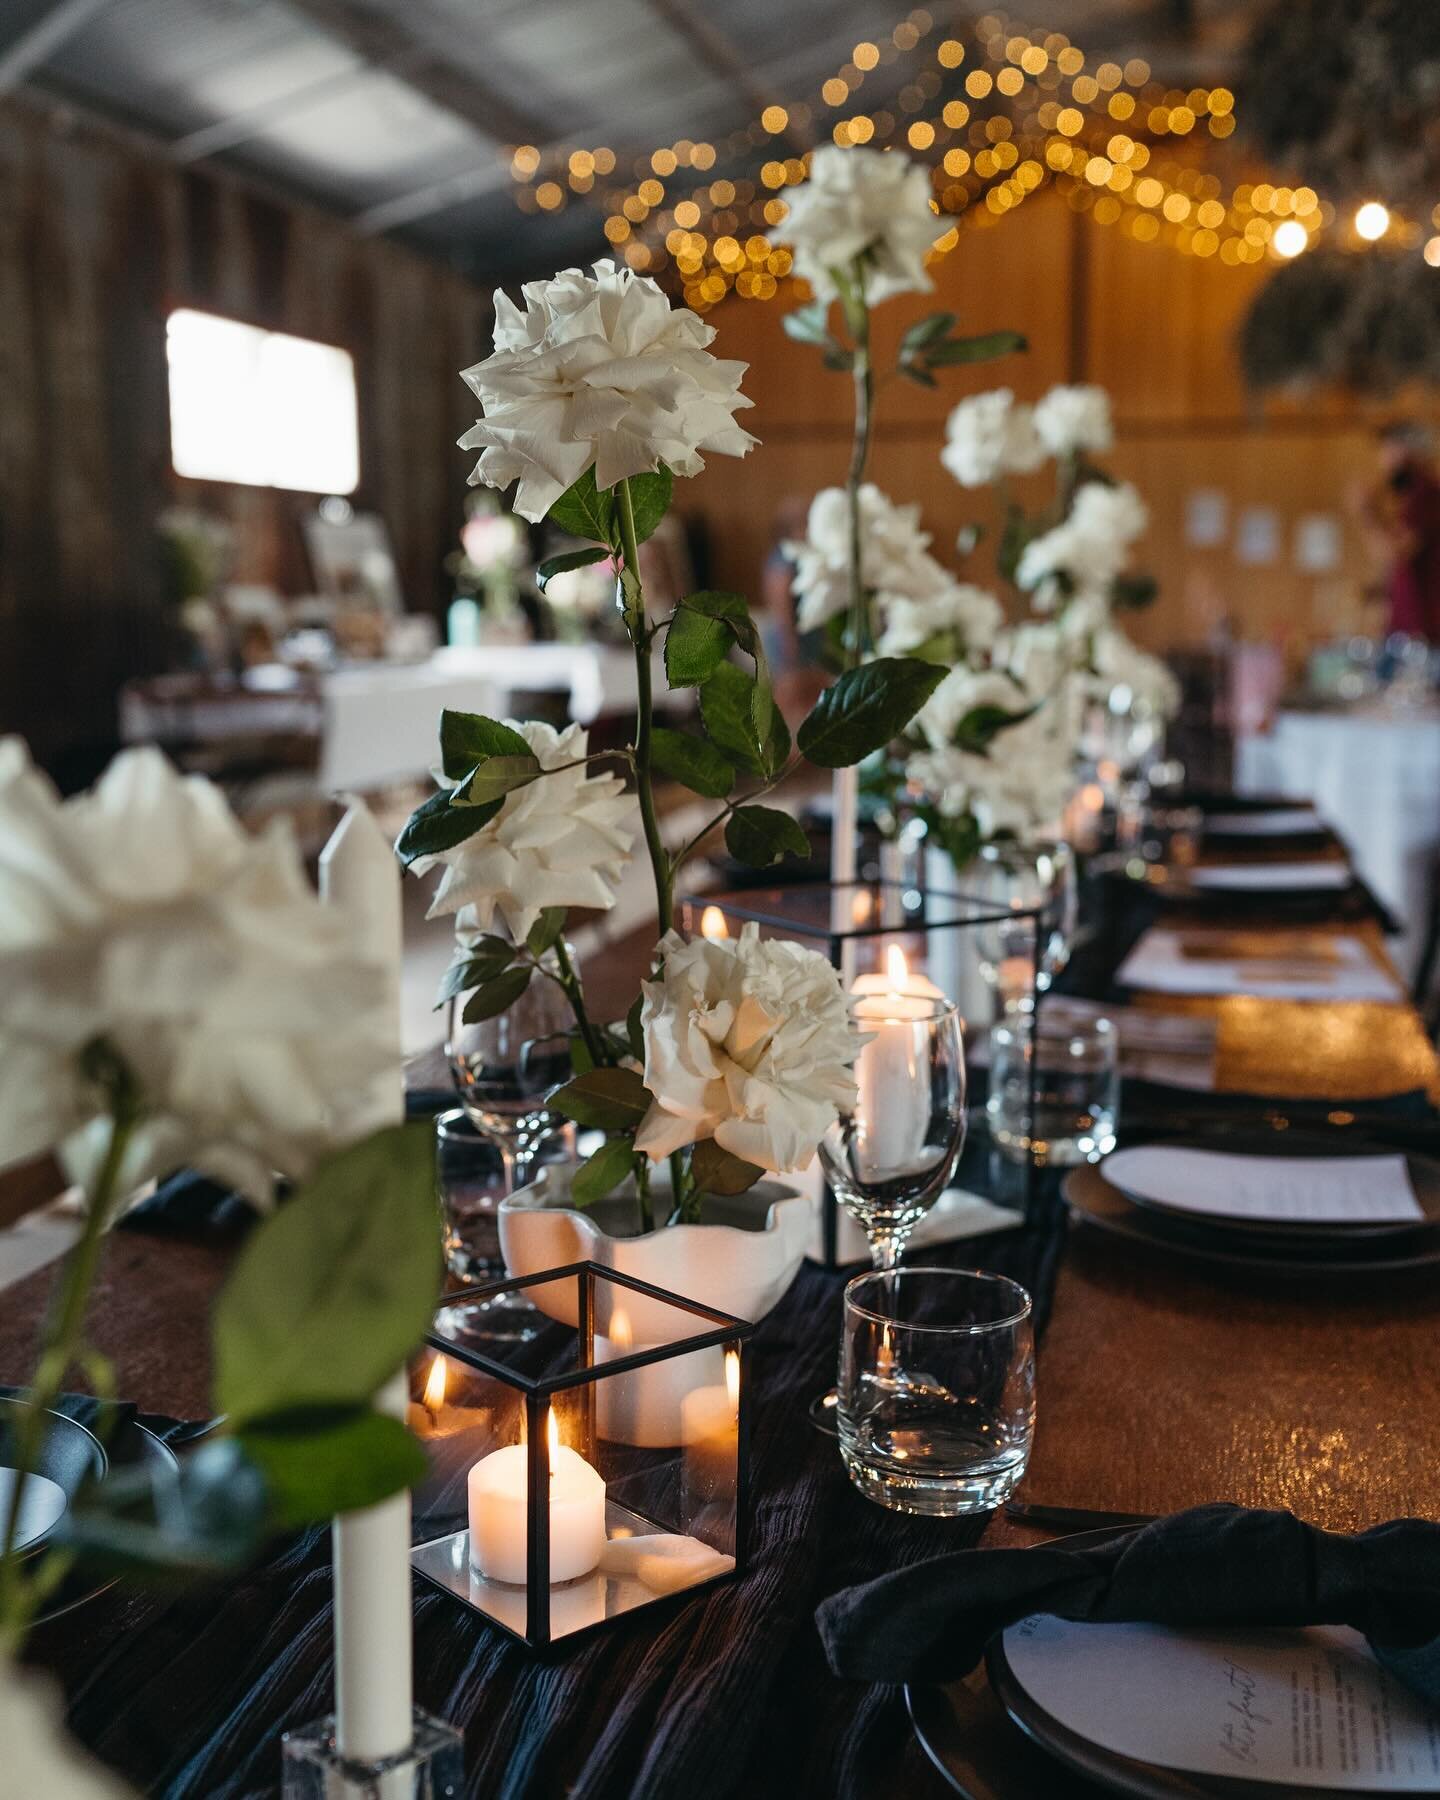 The most lovely thing about today is waking up and scrolling through 9.5 years of love posts ❤️🥰 

It&rsquo;s way too hard to share one image so I&rsquo;ll pop a few up in the stories but here are some images of some pretty tablescapes from our open